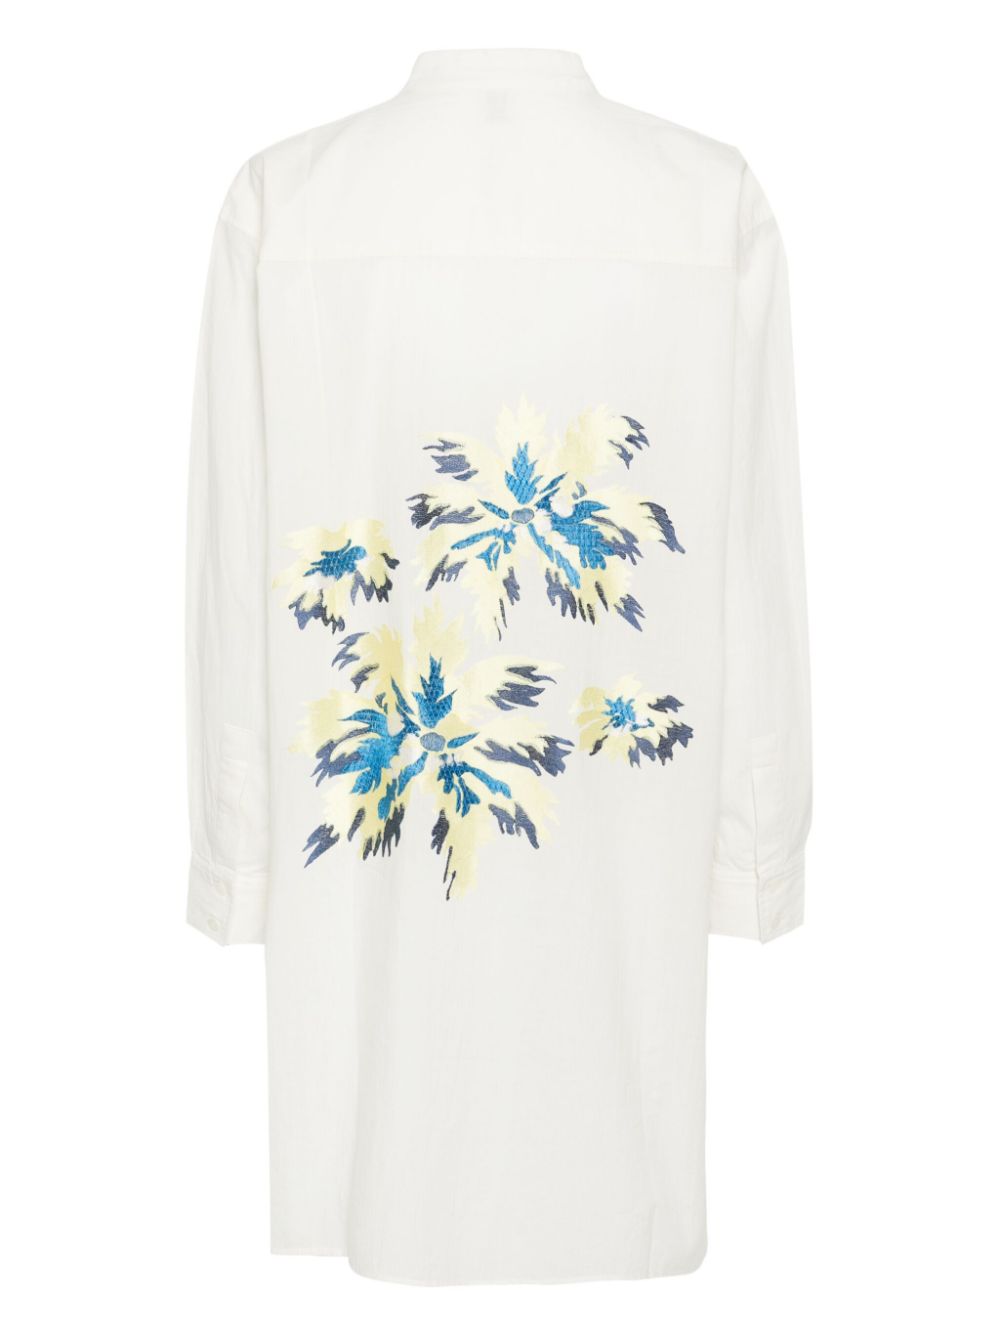 Paul Smith PAUL SMITH- Embroidered Shirt